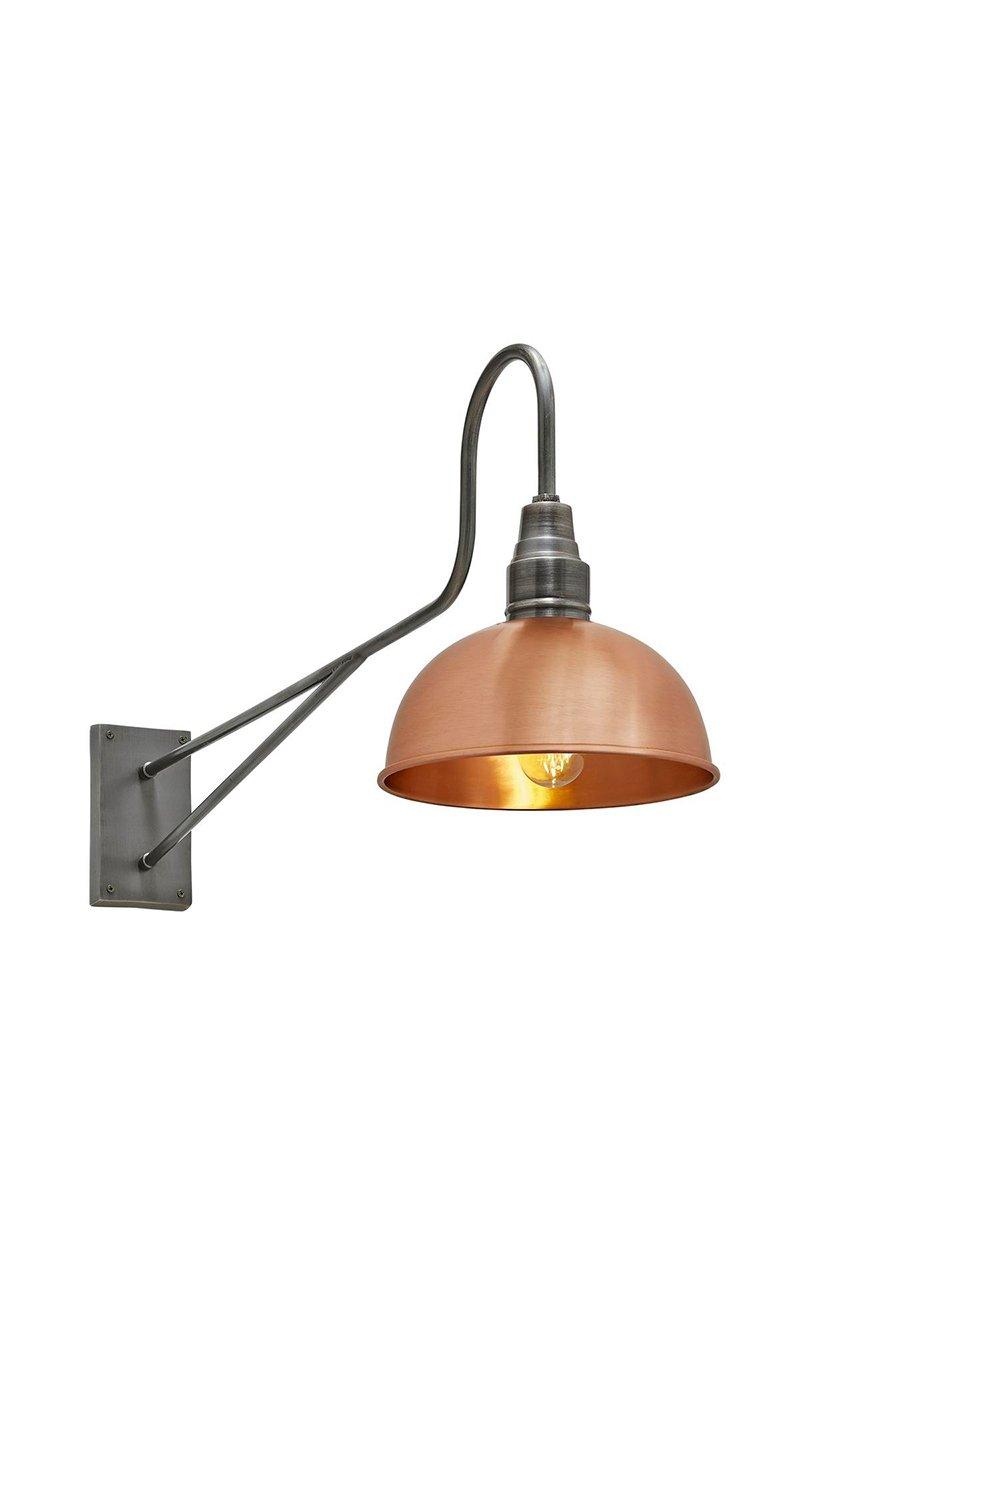 Long Arm Dome Wall Light, 8 Inch, Copper, Pewter Holder